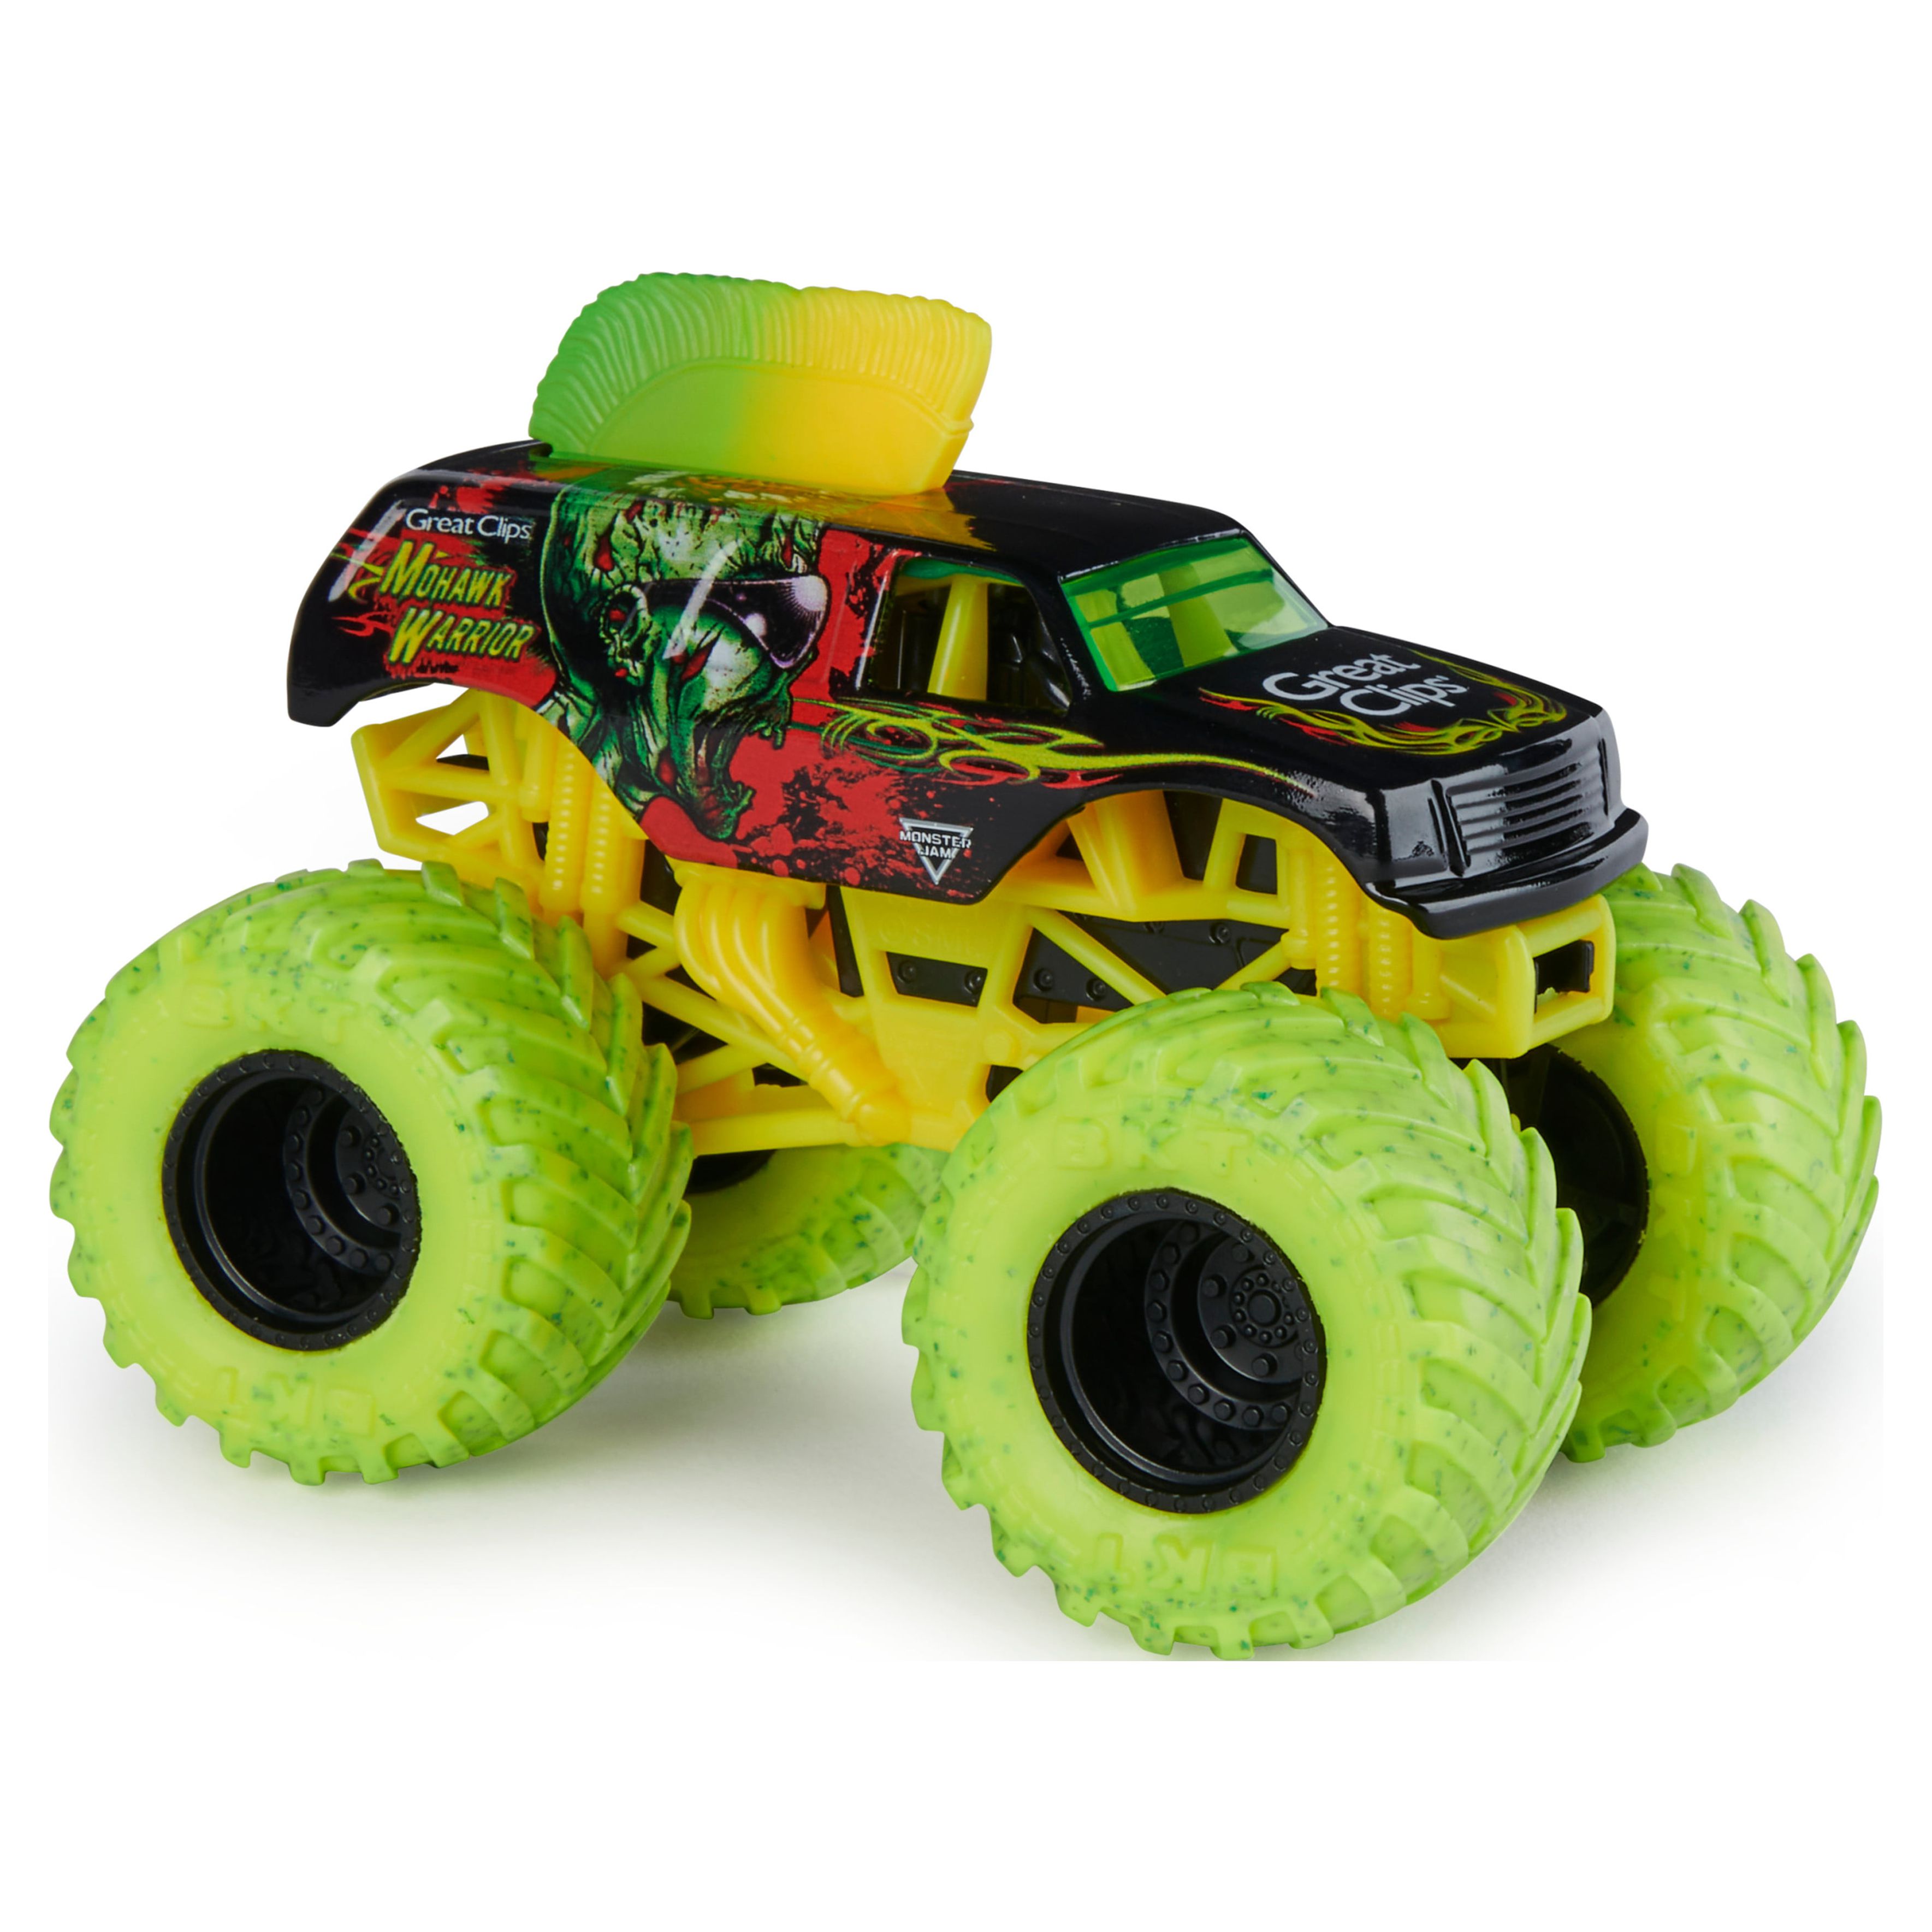 Monster Jam Gears and Galaxies Die-Cast Monster Truck, 1:64 Scale (Styles May Vary) - image 2 of 7